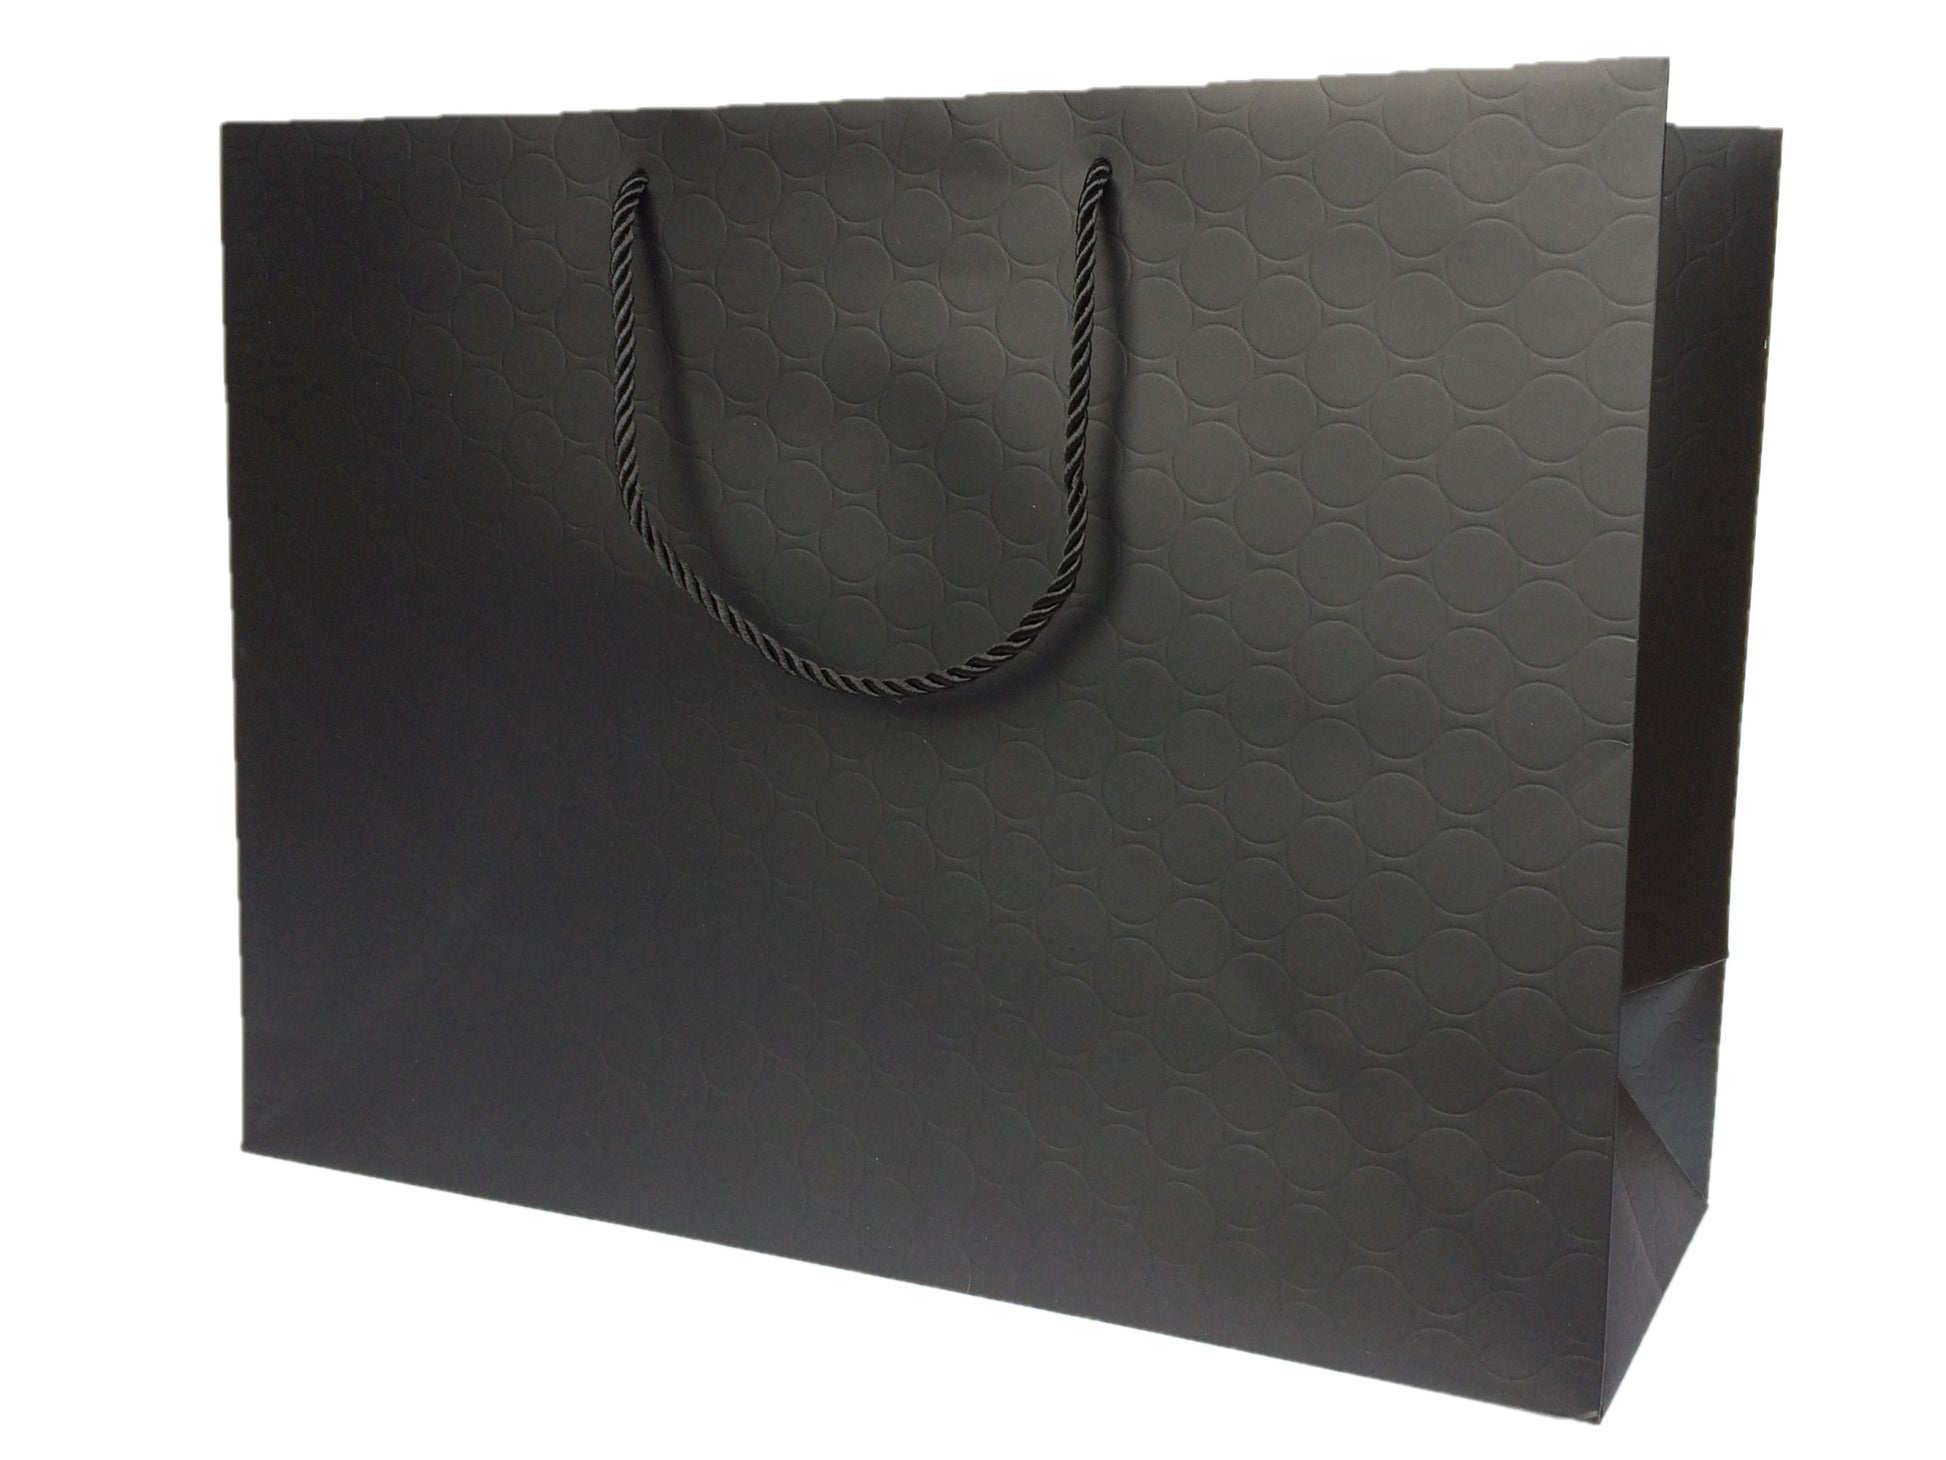 MODEENI 10 Extra Large Black Thank You Bags 16x6x12 Gold Foil Luxury Matte XL Gift Bags Premium Quality Embossed Large Paper Bags Fancy Modern